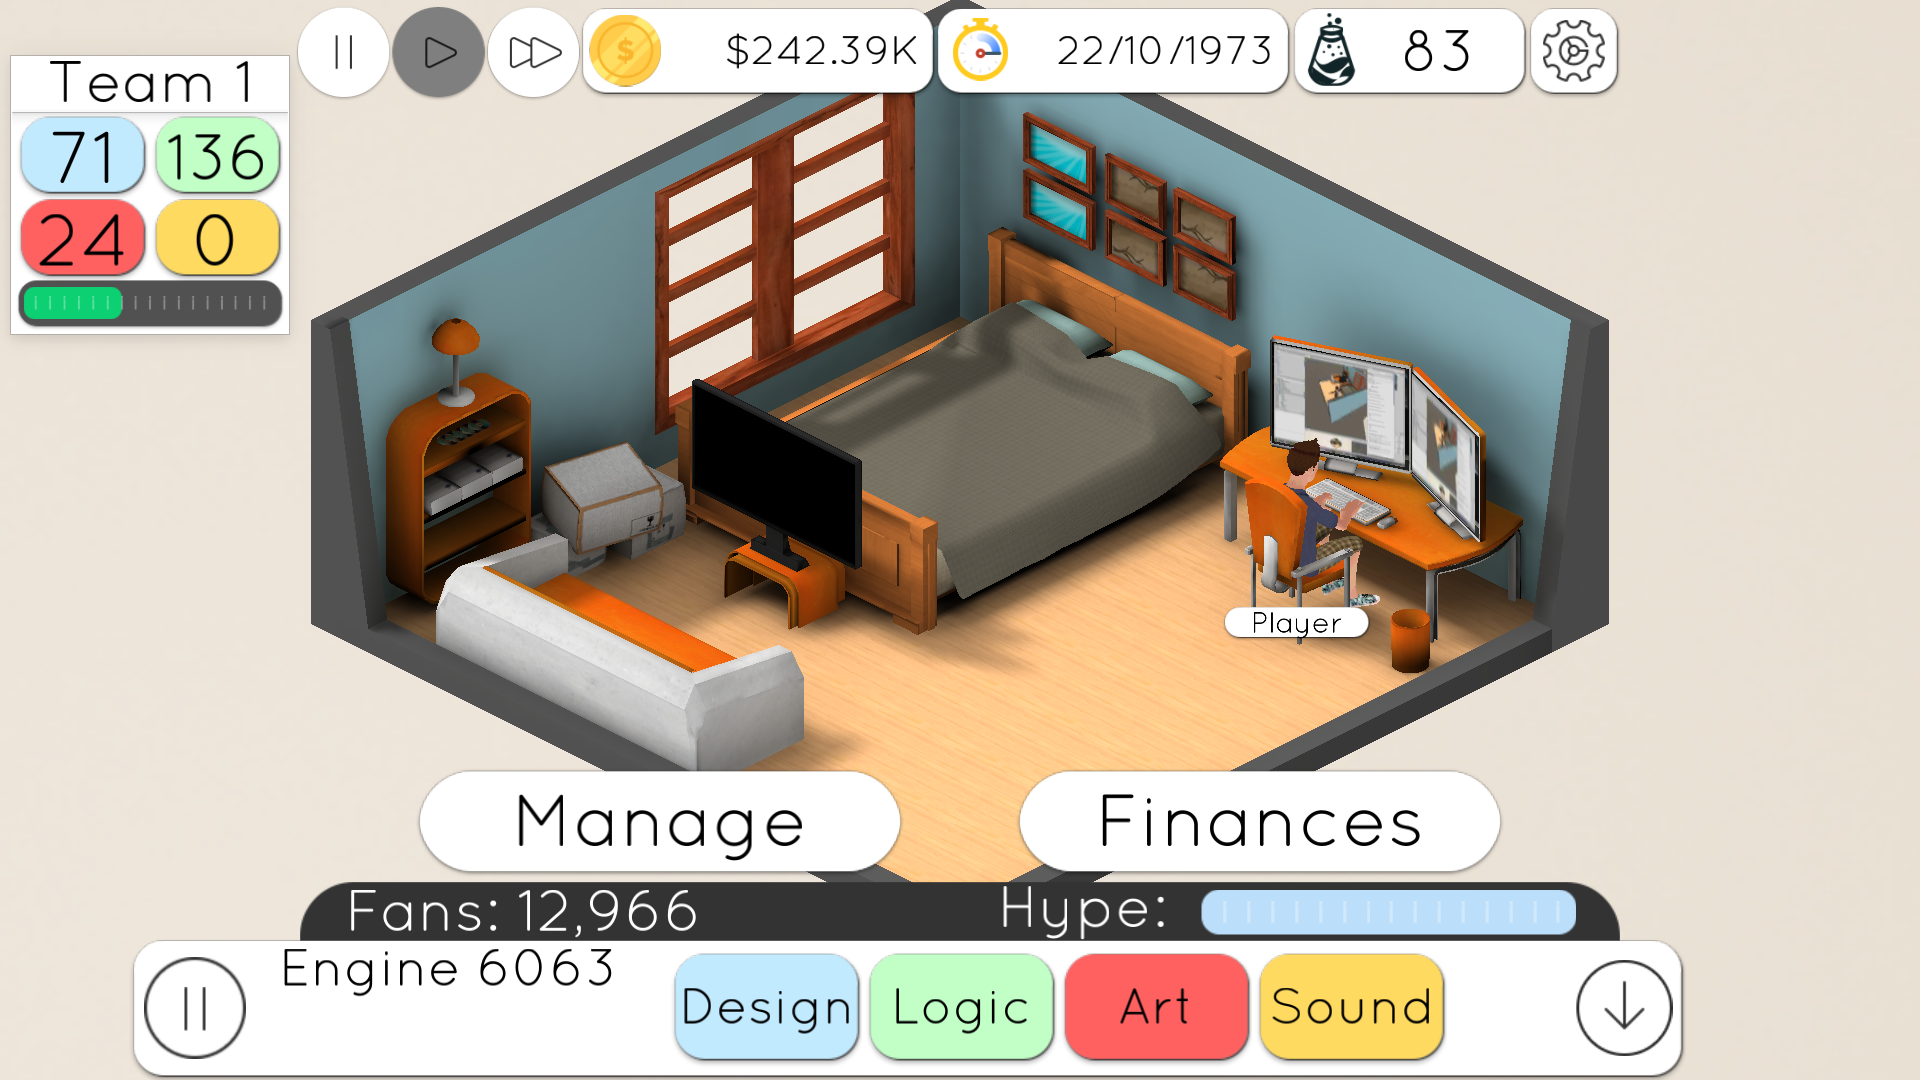 Device tycoon 3.3 0. Game Studio Tycoon Android. Dev Tycoon 2. Game Studio Tycoon 2. Dev Tycoon андроид.